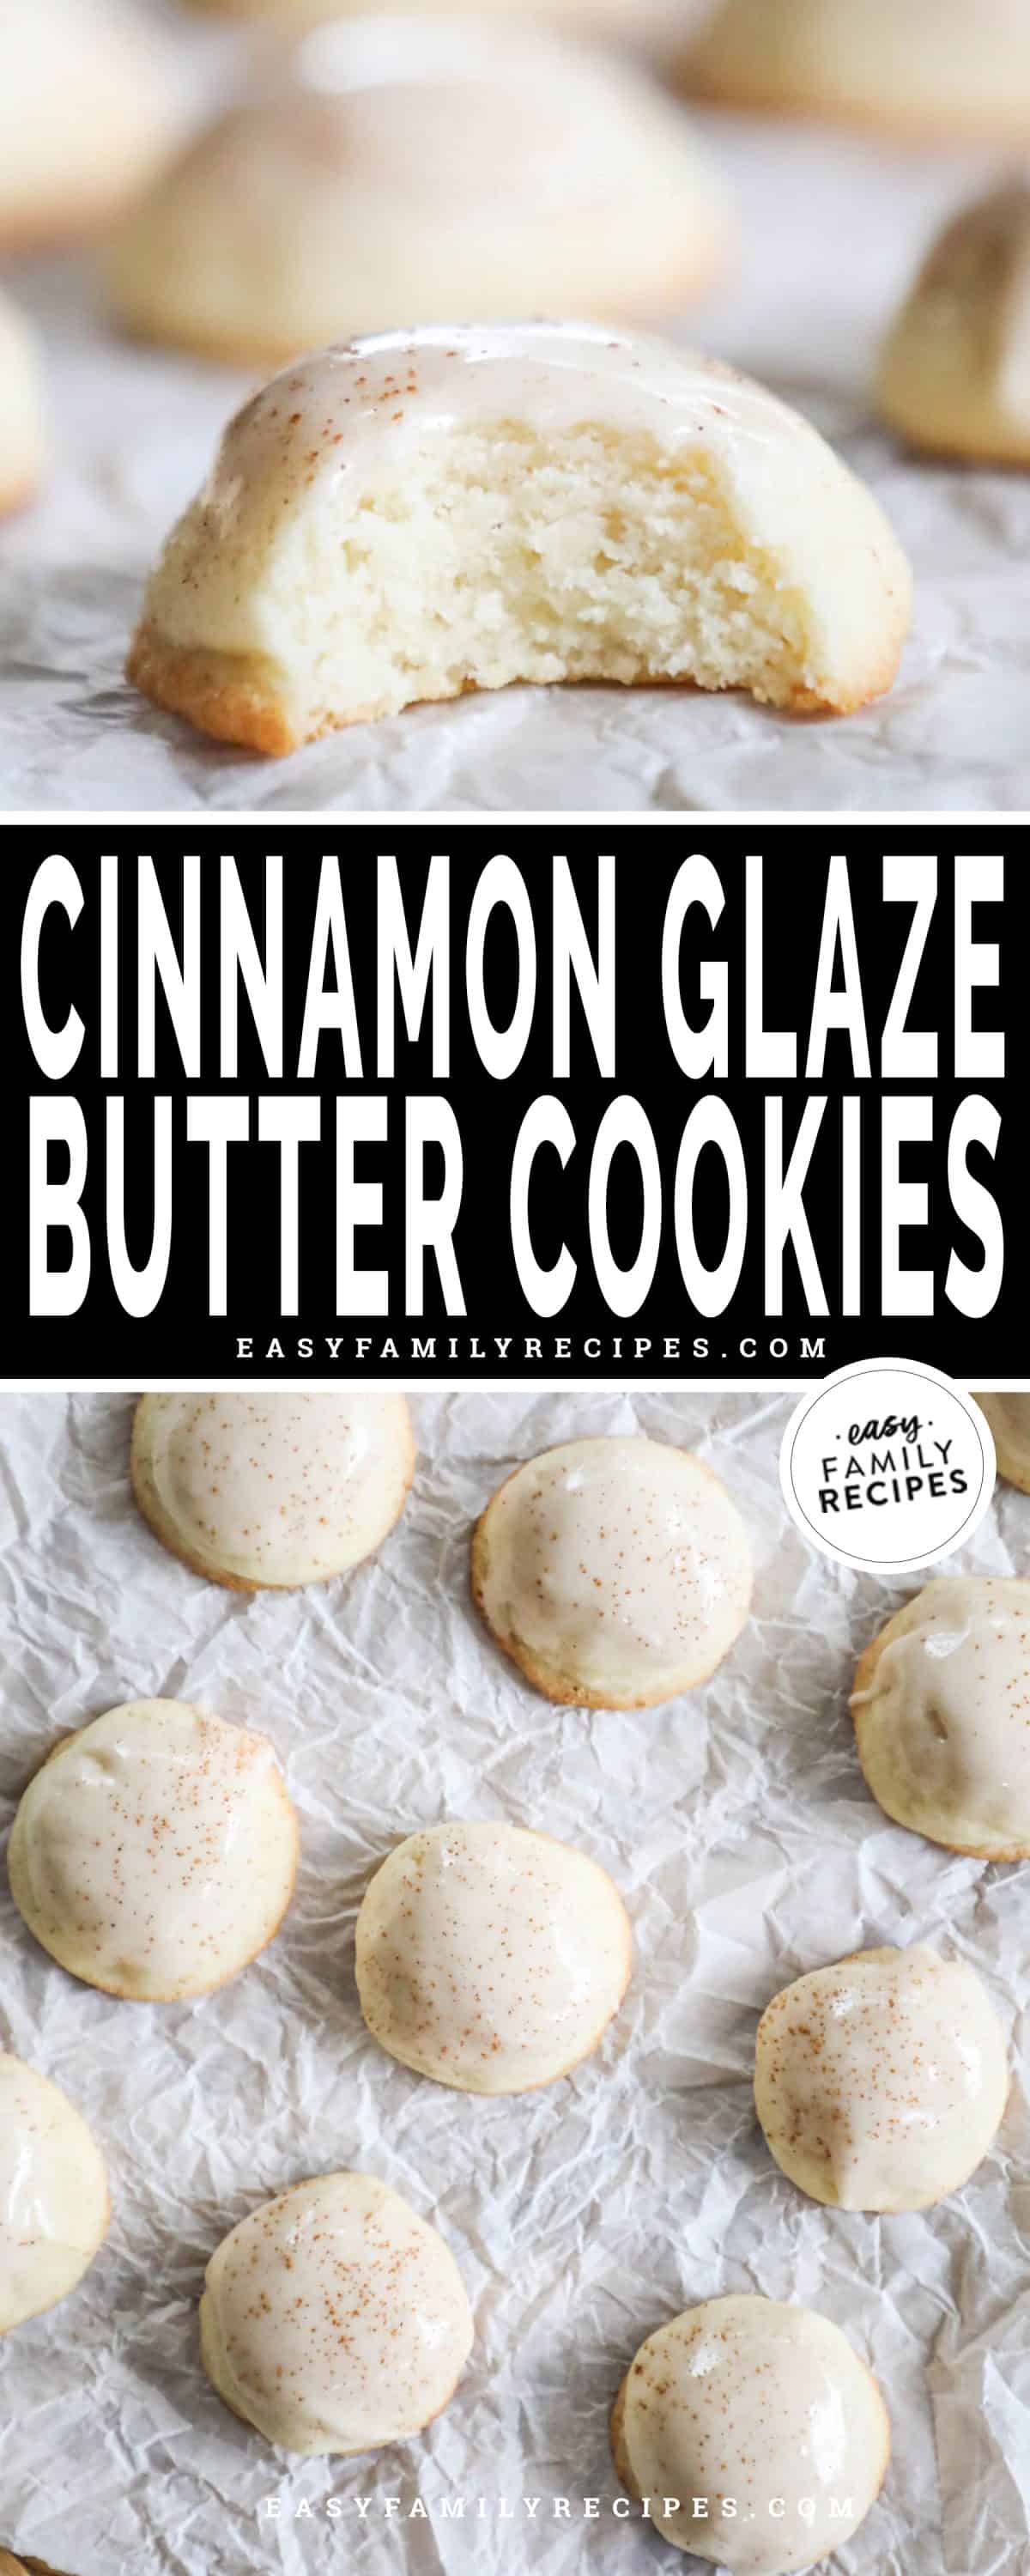 Butter cookies with cinnamon glaze on a baking tray and one head on image with a bite taken out of the cookie.